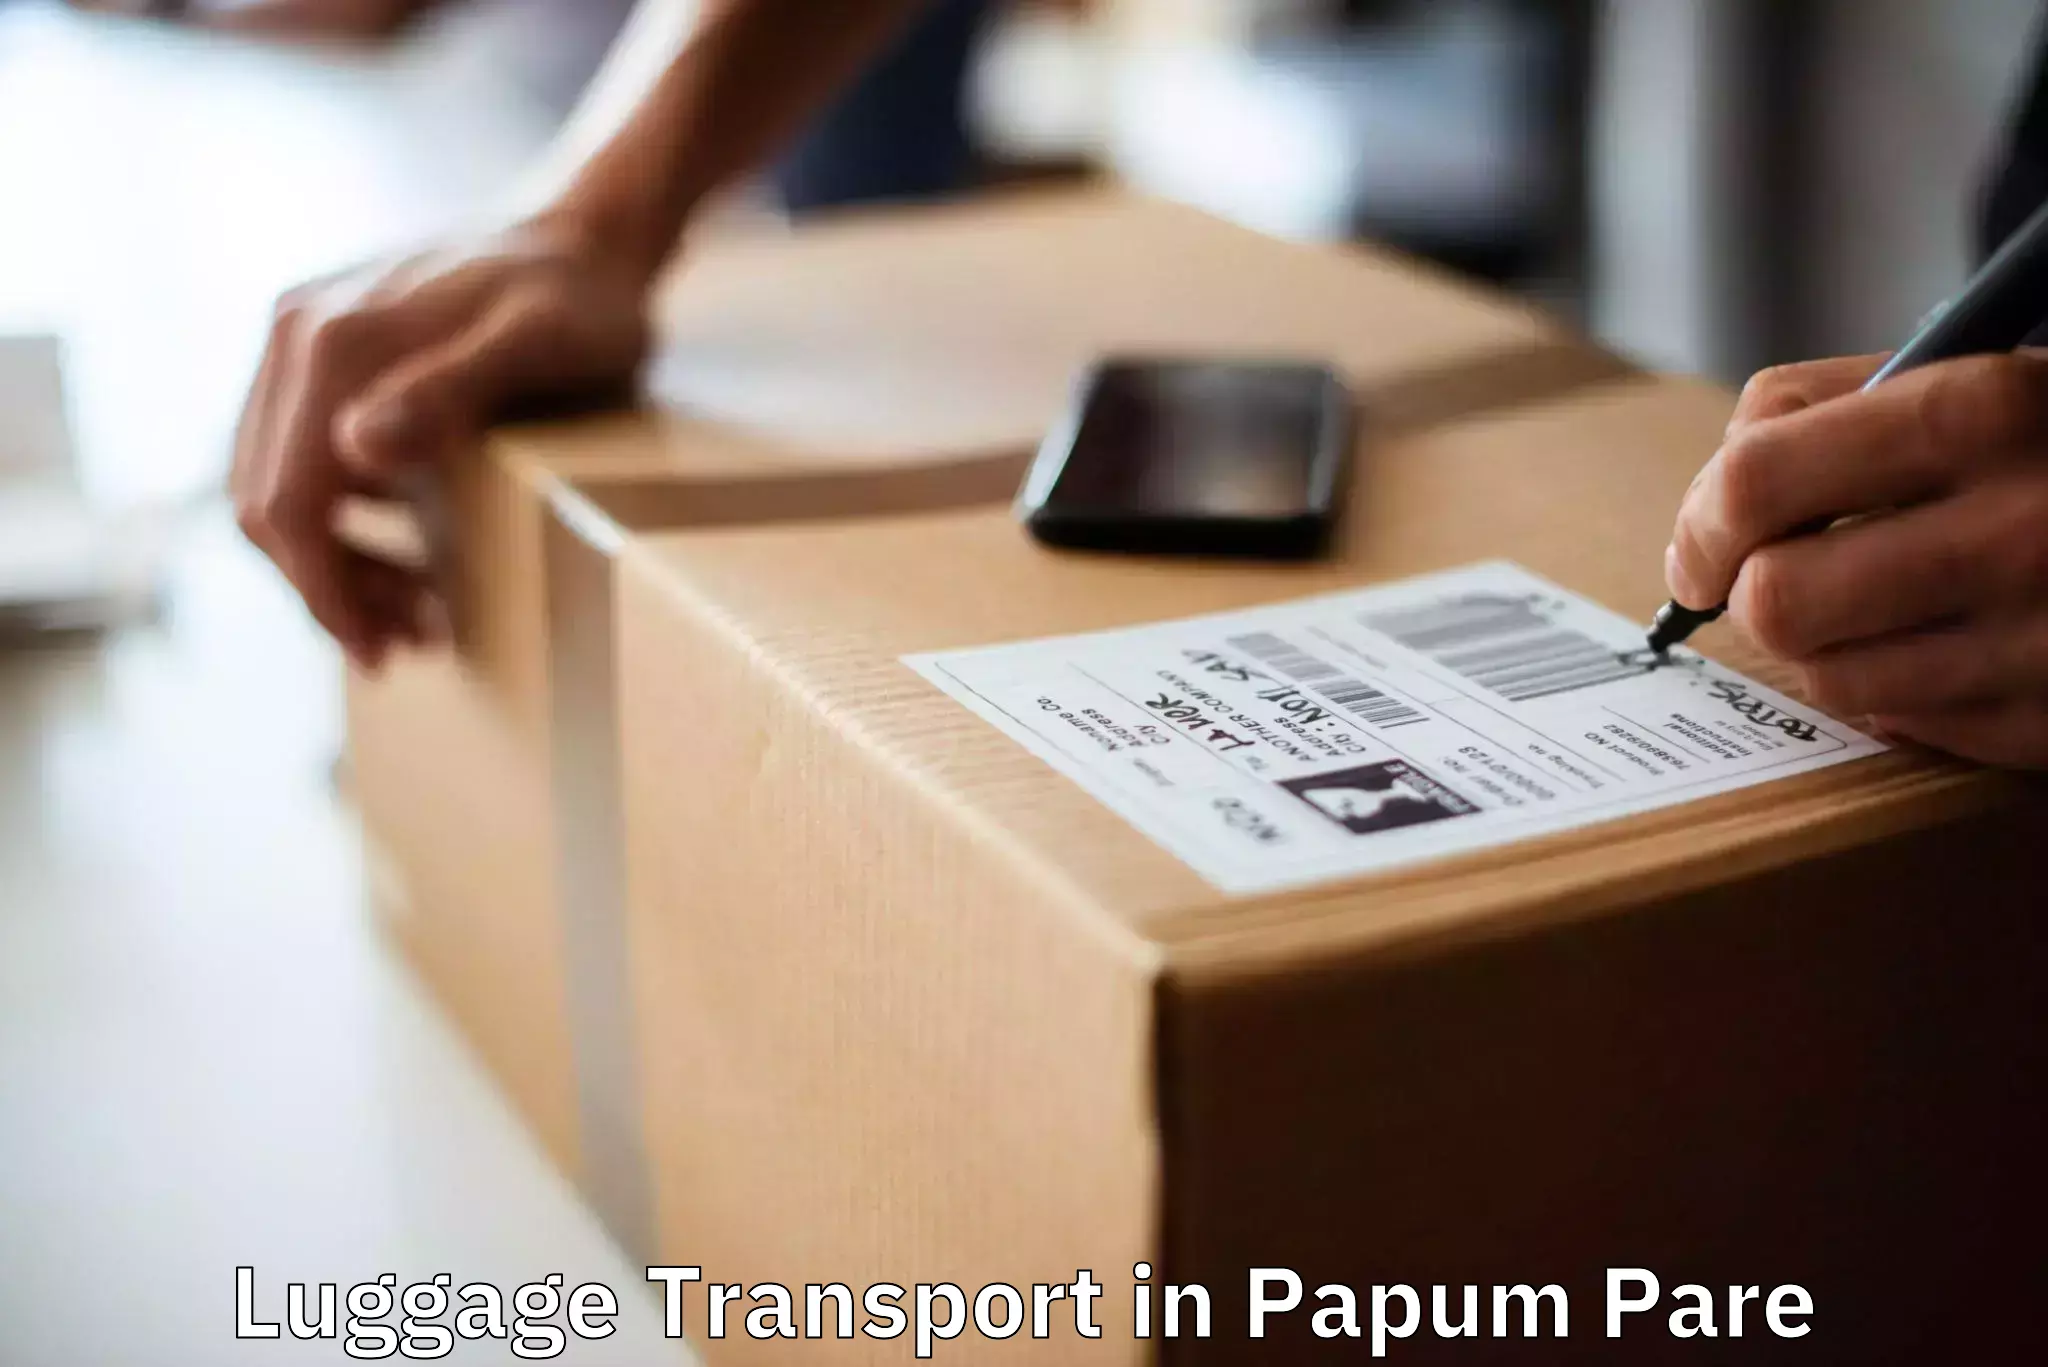 Luggage shipment tracking in Papum Pare